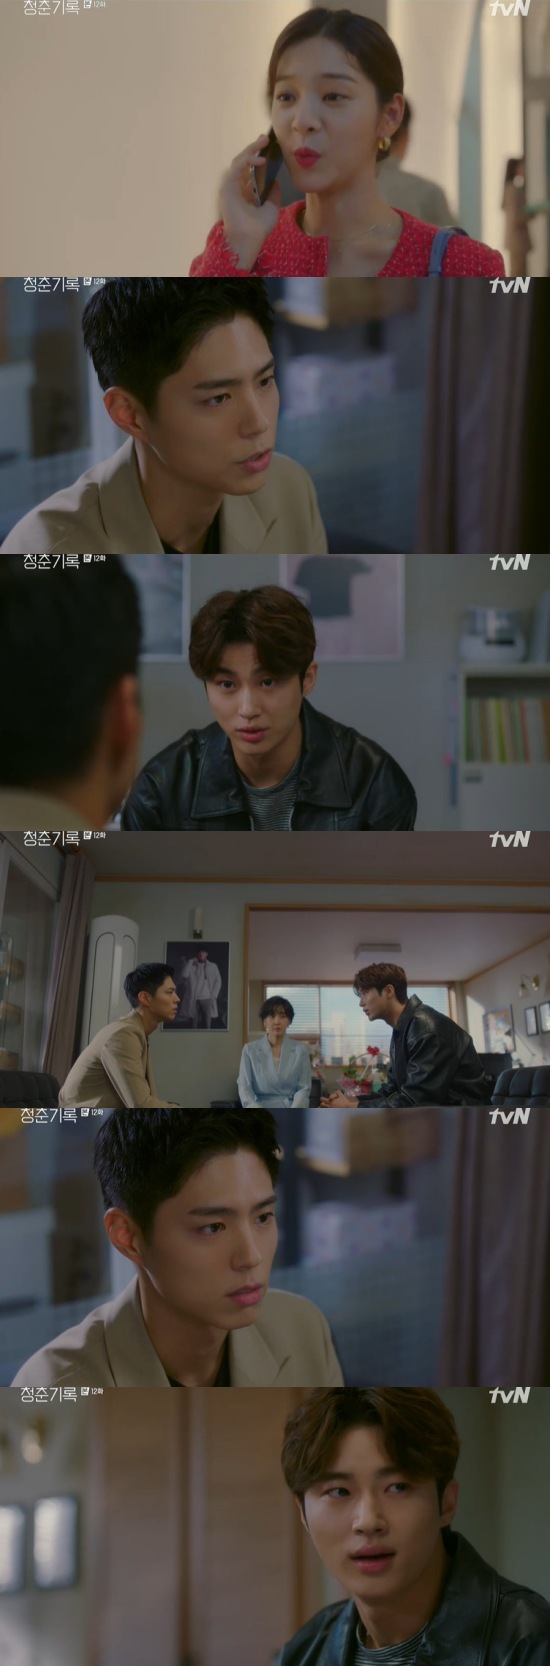 Record of Youth Byeon Wooseok and Seol In-ah stepped up for Park Bo-gum.In the 12th episode of tvN Record of Youth broadcast on the 13th, Sa Hye-joon (Park Bo-gum) and Won Hae-hyo (Byeon Wooseok) were shown arguing.On this day, Jung Ji-ah met Kim Soo-man (Bae Yoon-kyung) to help Sa Hye-joon, who is suffering from rumors of sexual minority.Sa Hye-joon said, You came late. Won Hae-hyo persuaded me, Are you angry? I wanted to help you. I cooperated that help would help you.Sa Hye-joon said, I have help to receive and I have help to not receive. Jia help is the latter.Photo = TVN broadcast screen